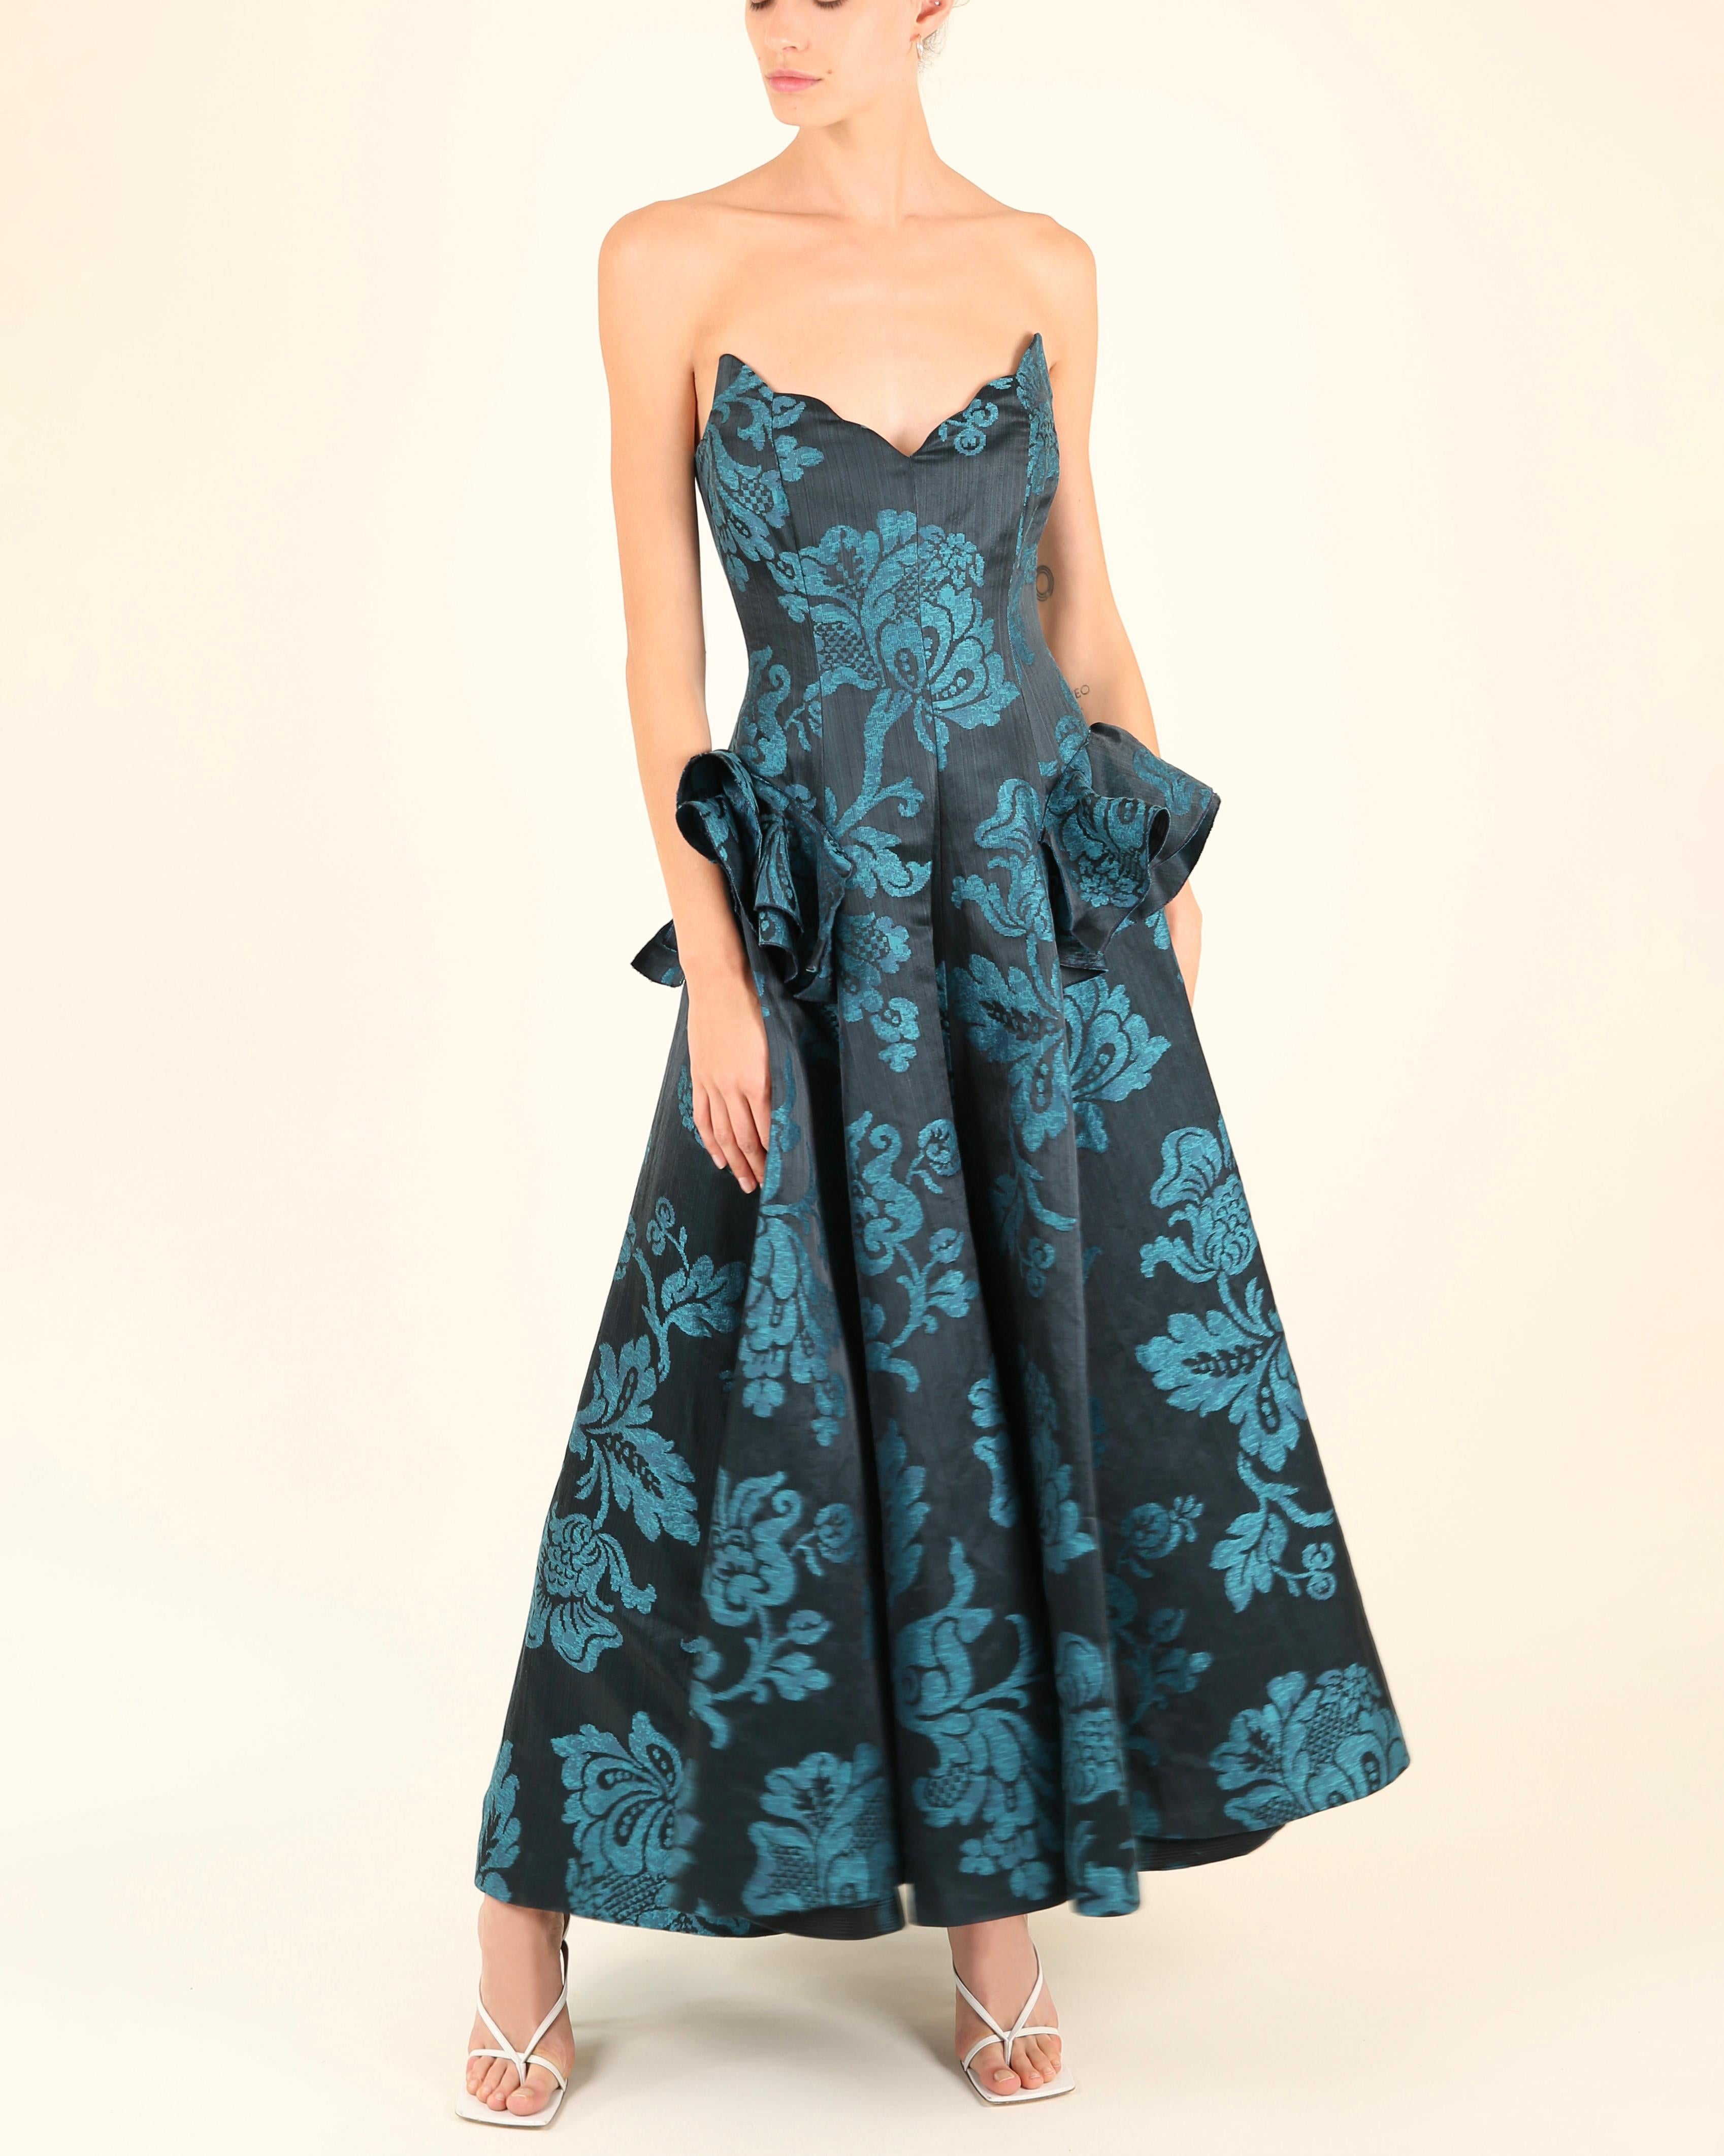 Oscar de la Renta F/W06 strapless floral blue teal fit and flare dress gown XS For Sale 1